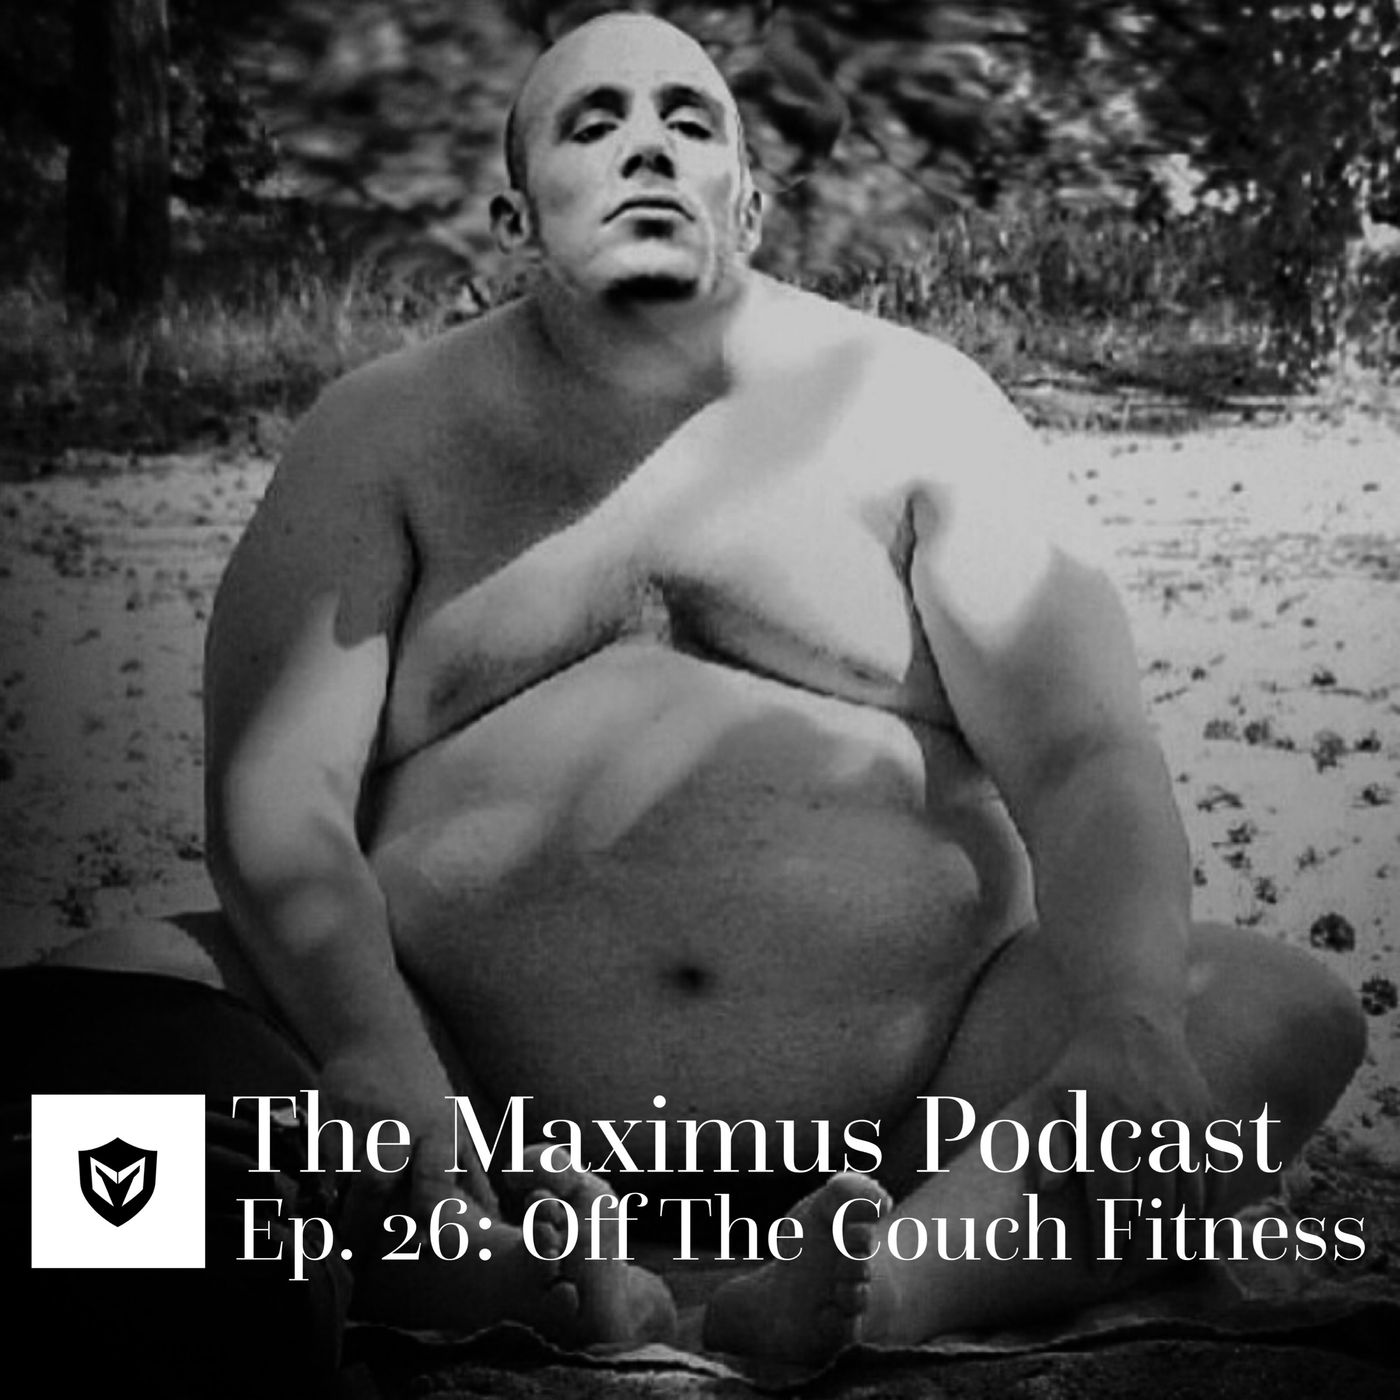 The Maximus Podcast Ep. 26 - Off The Couch Fitness